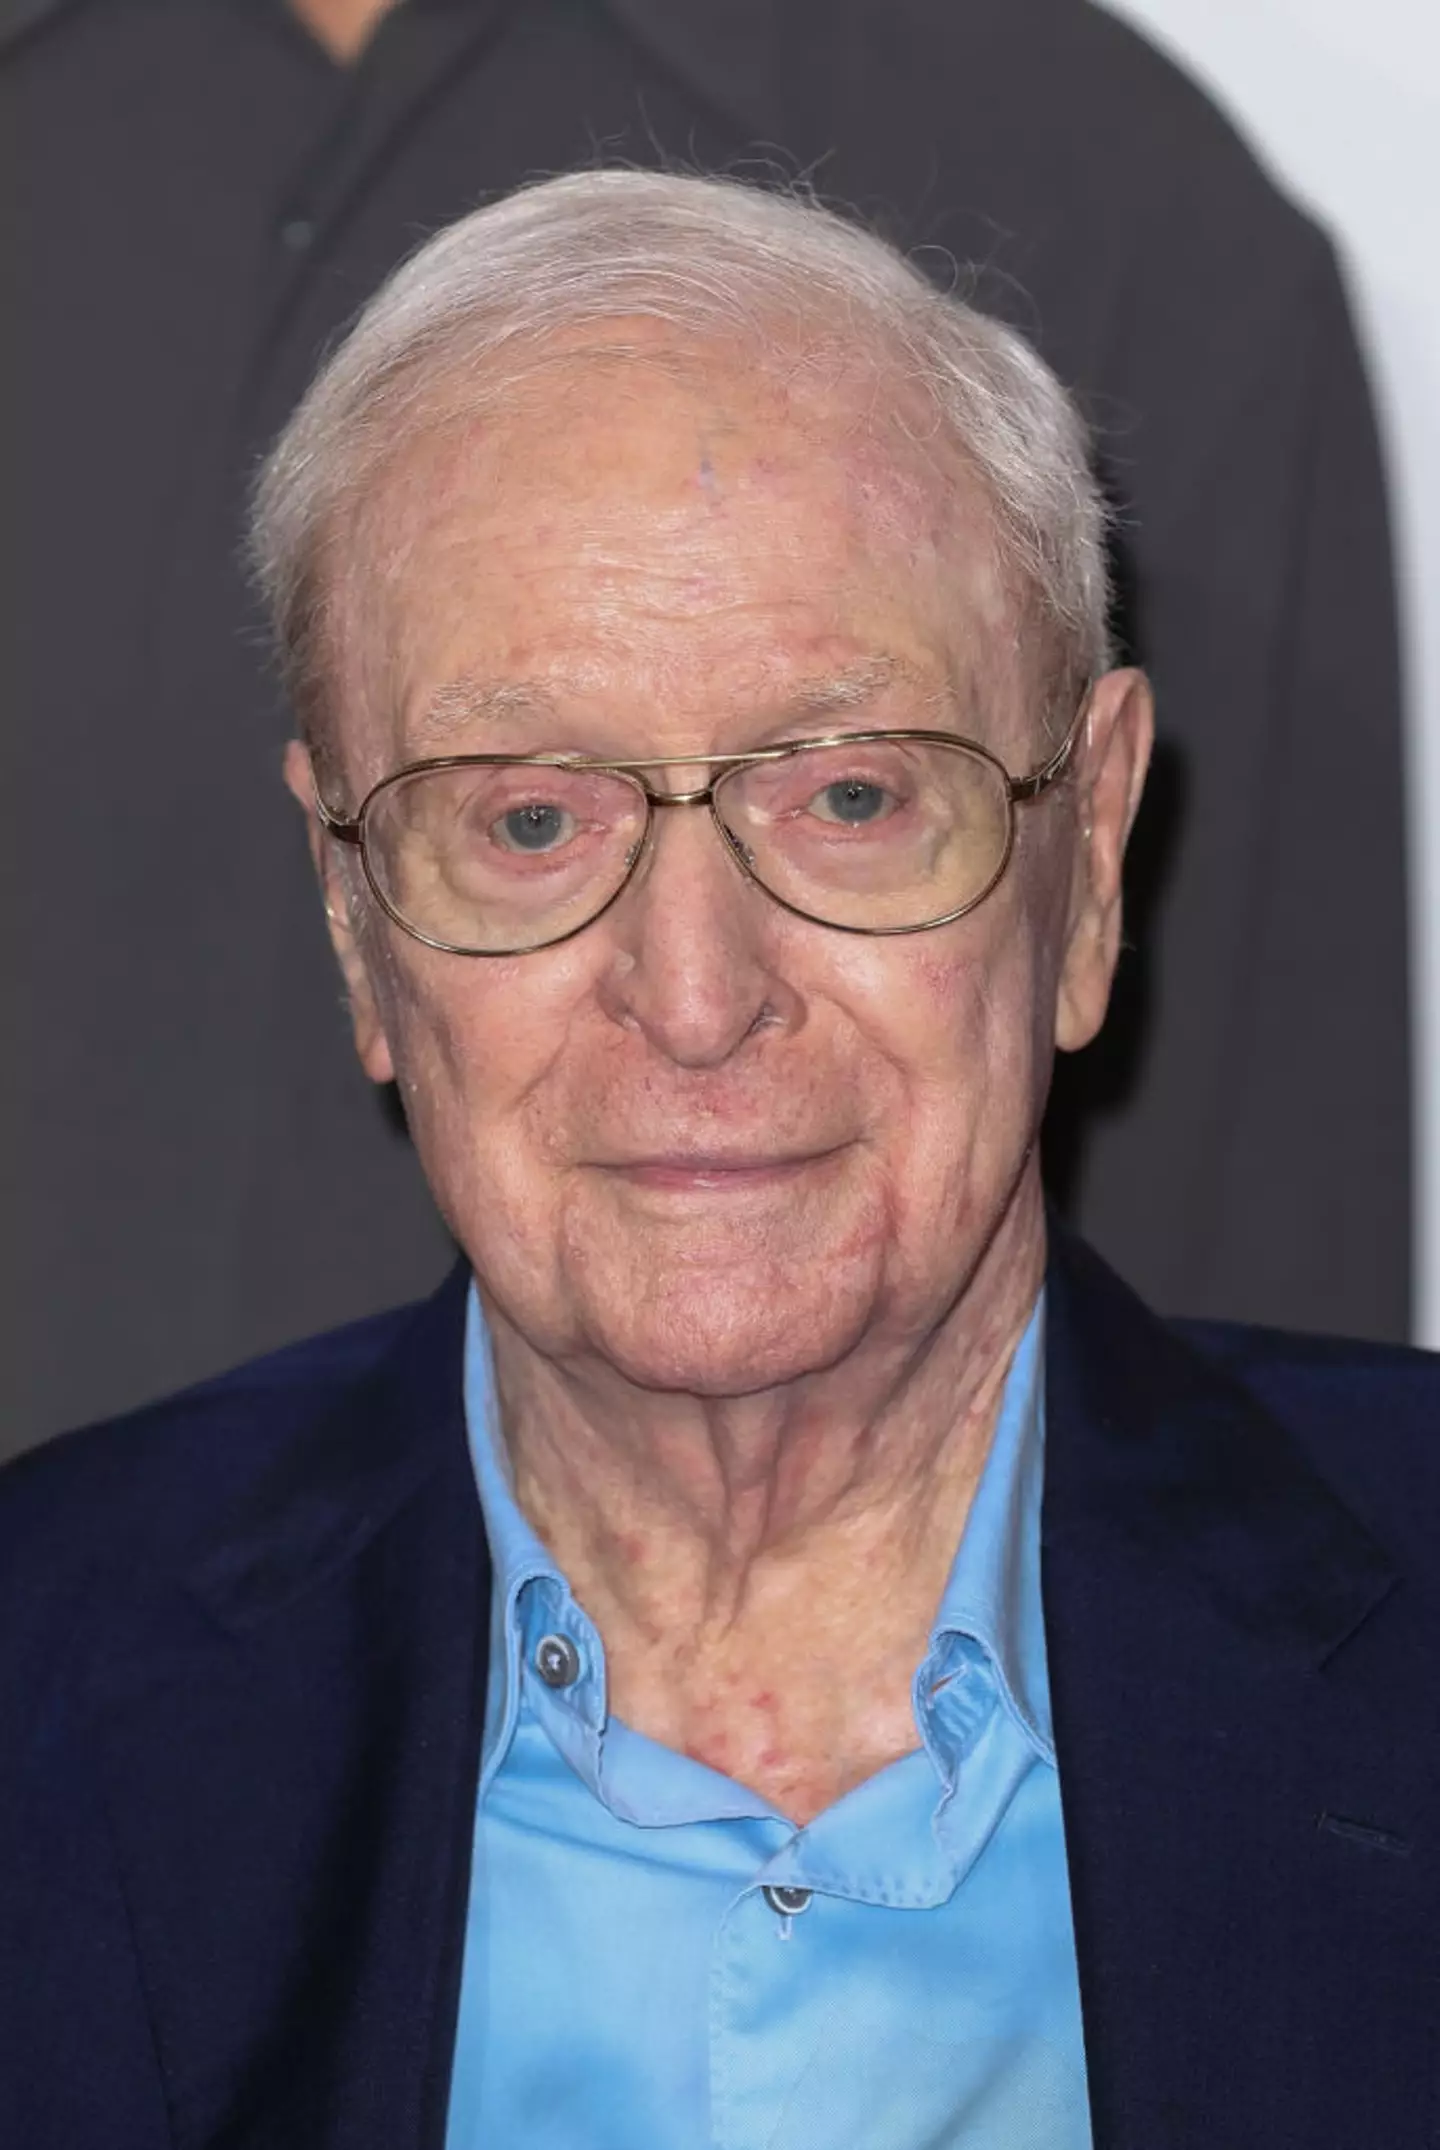 Sir Michael Caine has opened up about his mortality.